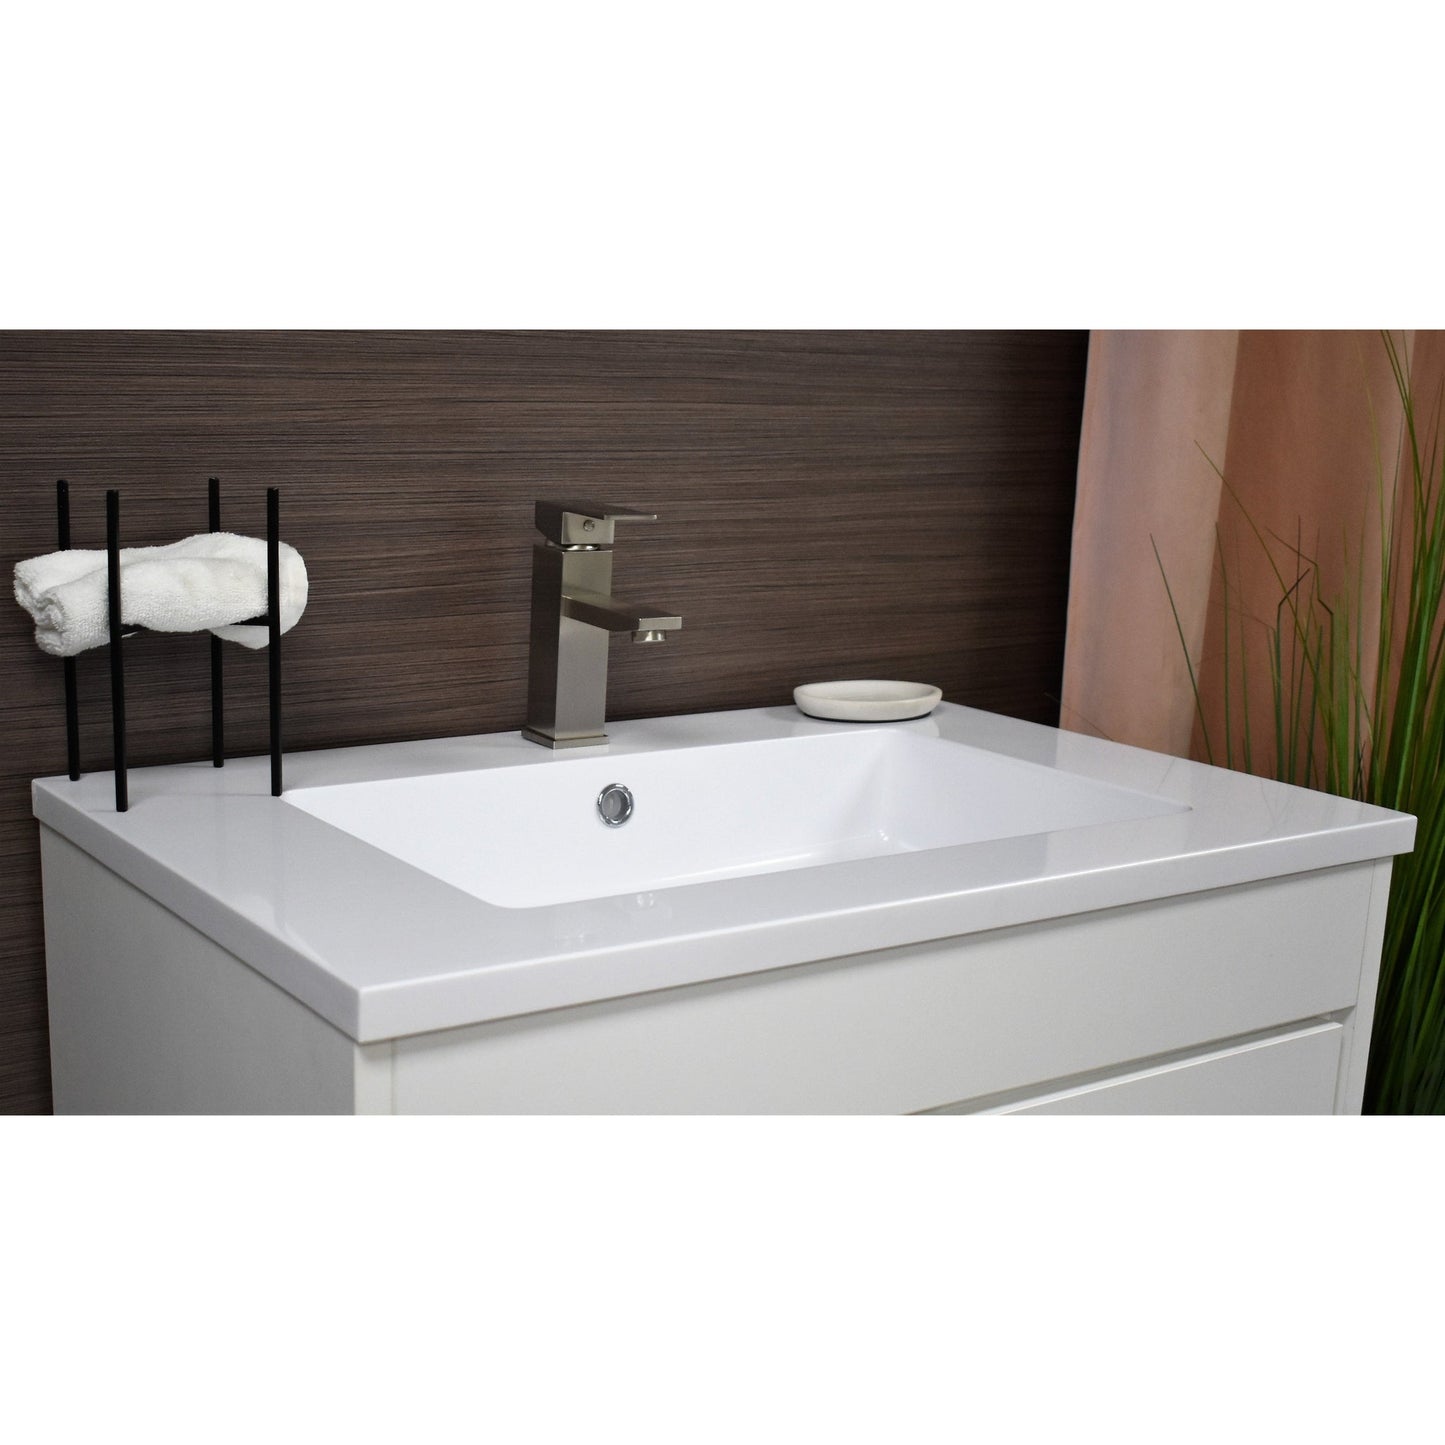 Volpa USA Rio 30" White Freestanding Modern Bathroom Vanity With Integrated Acrylic Top and Brushed Nickel Handles